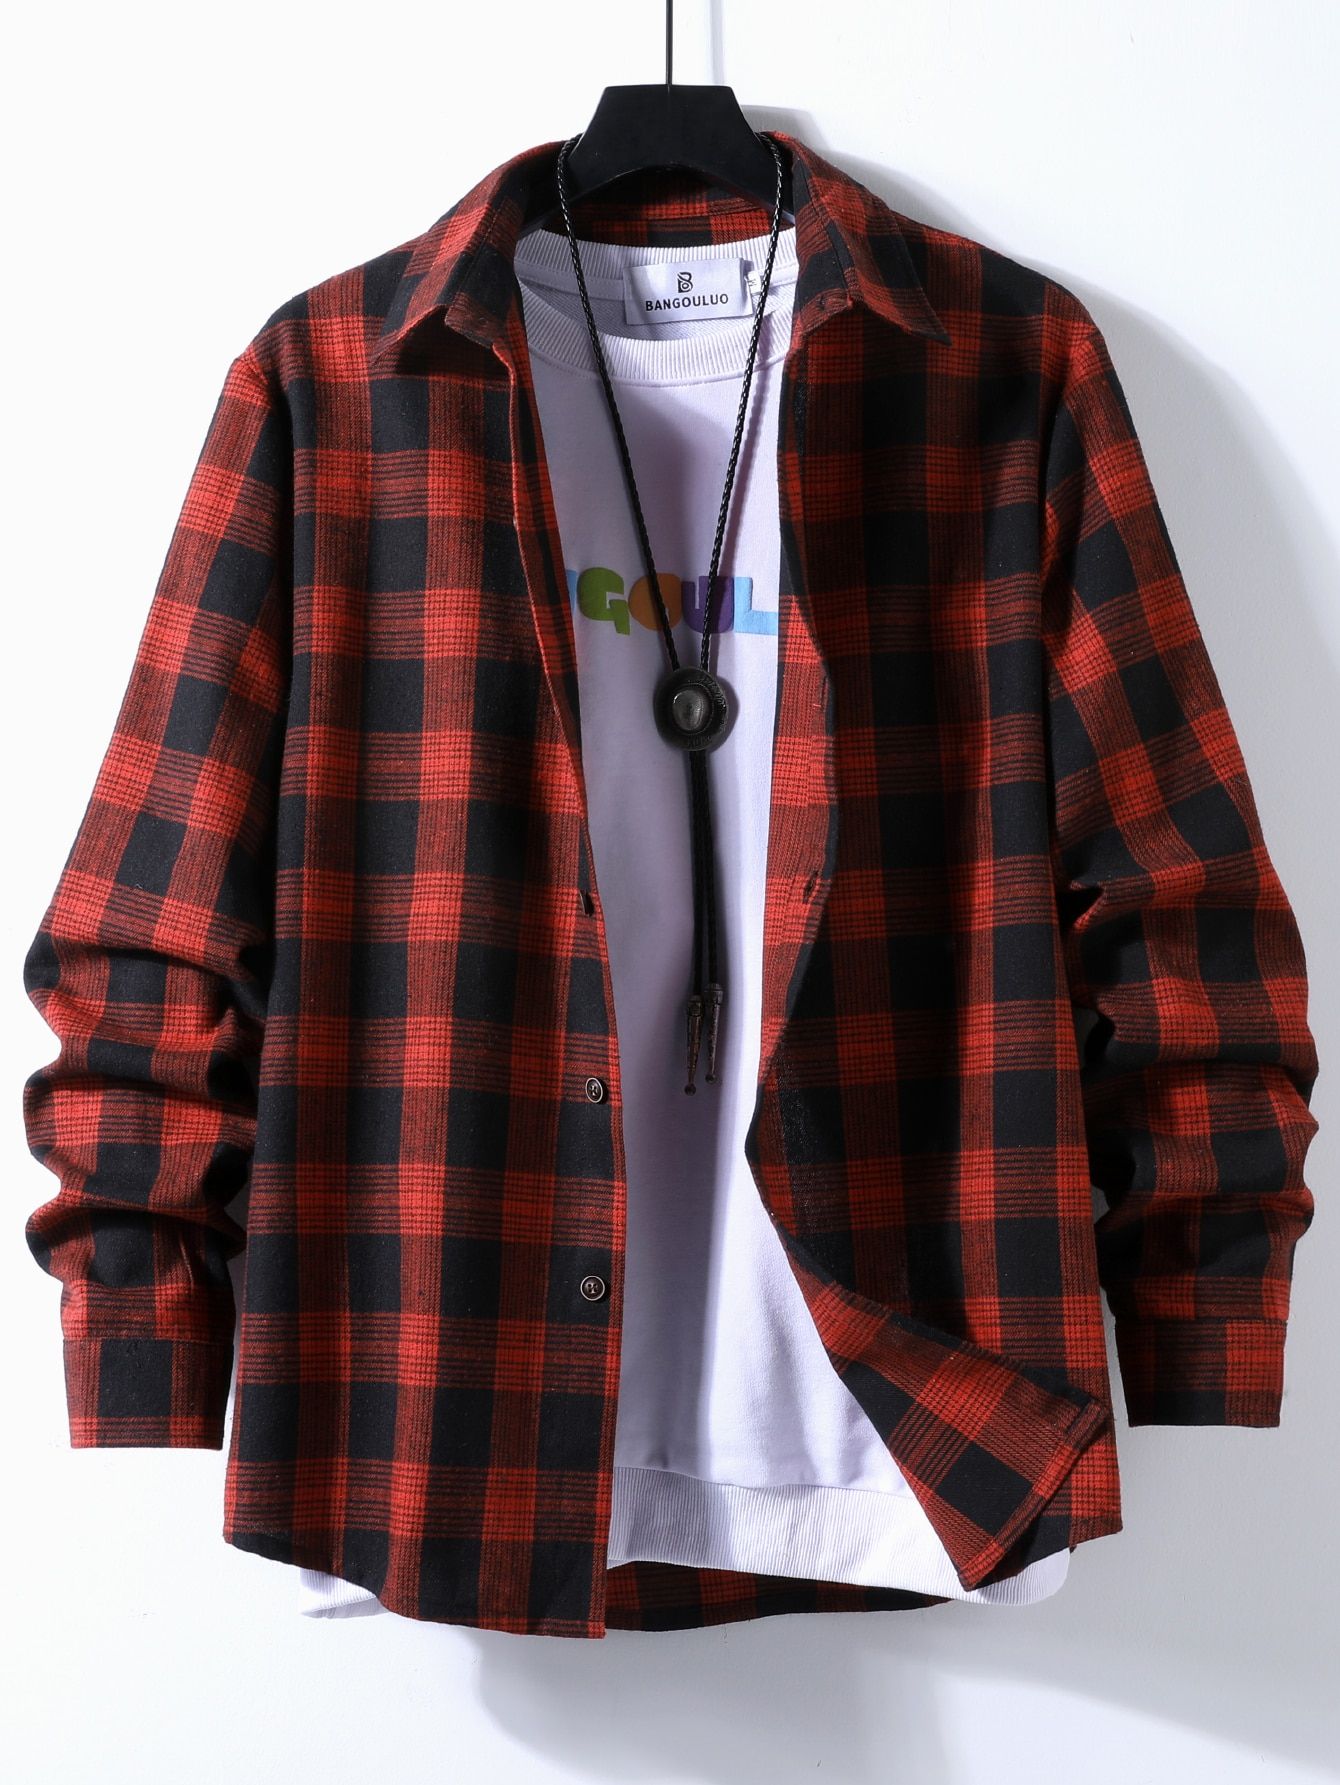 Classic Cool: Stay Stylish in Plaid Shirts for Men